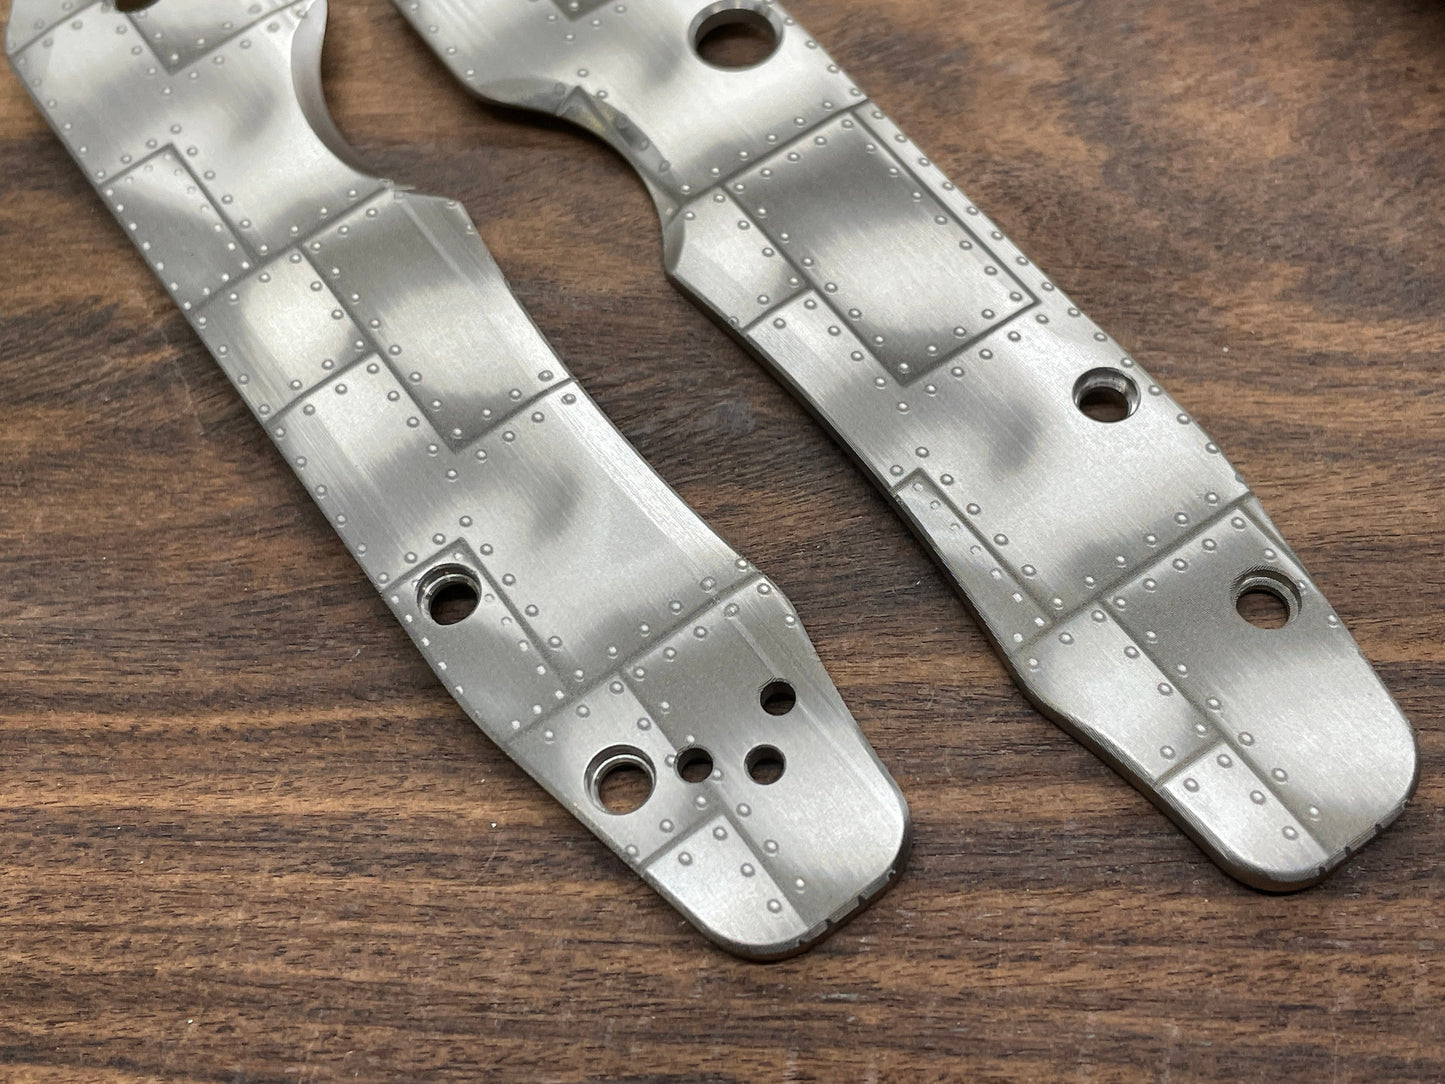 RIVETED AIRPLANE Titanium Scales for Spyderco SMOCK